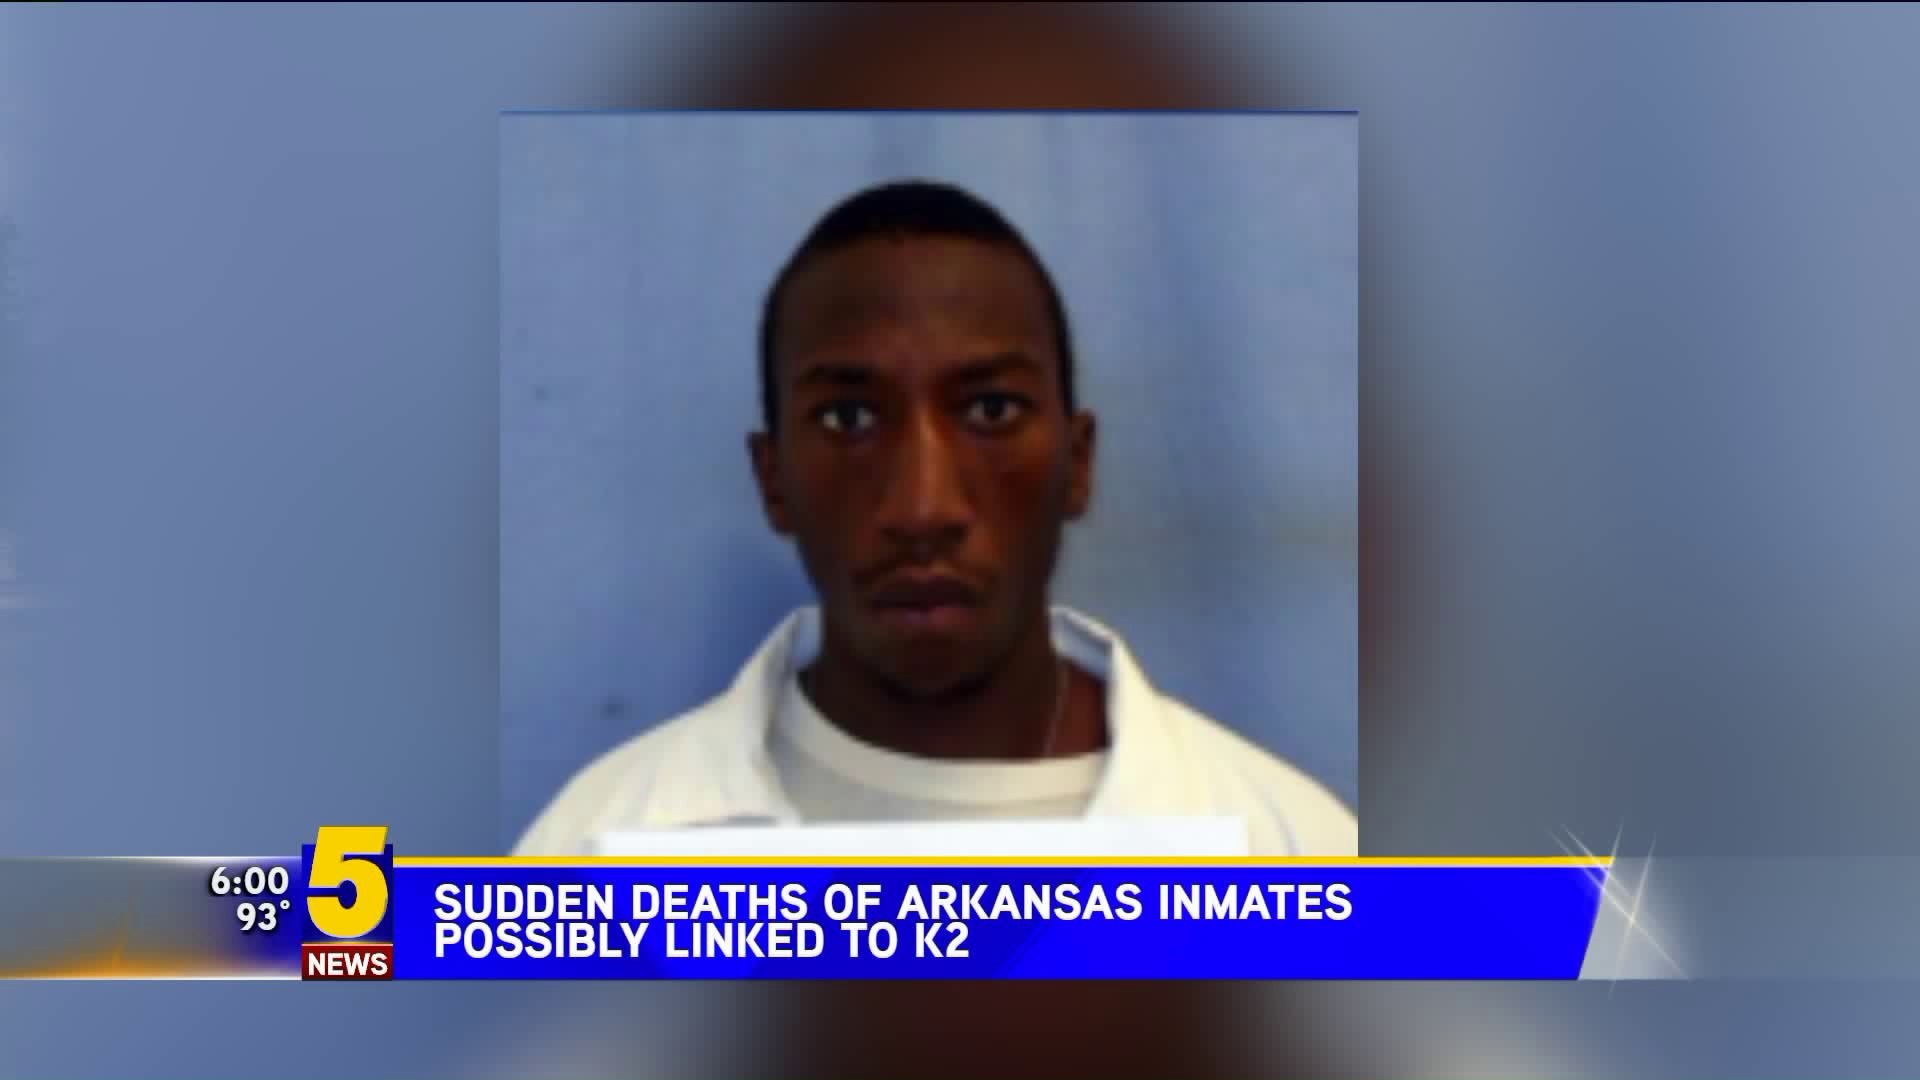 Sudden deaths of Arkansas inmates possibly linked to K2